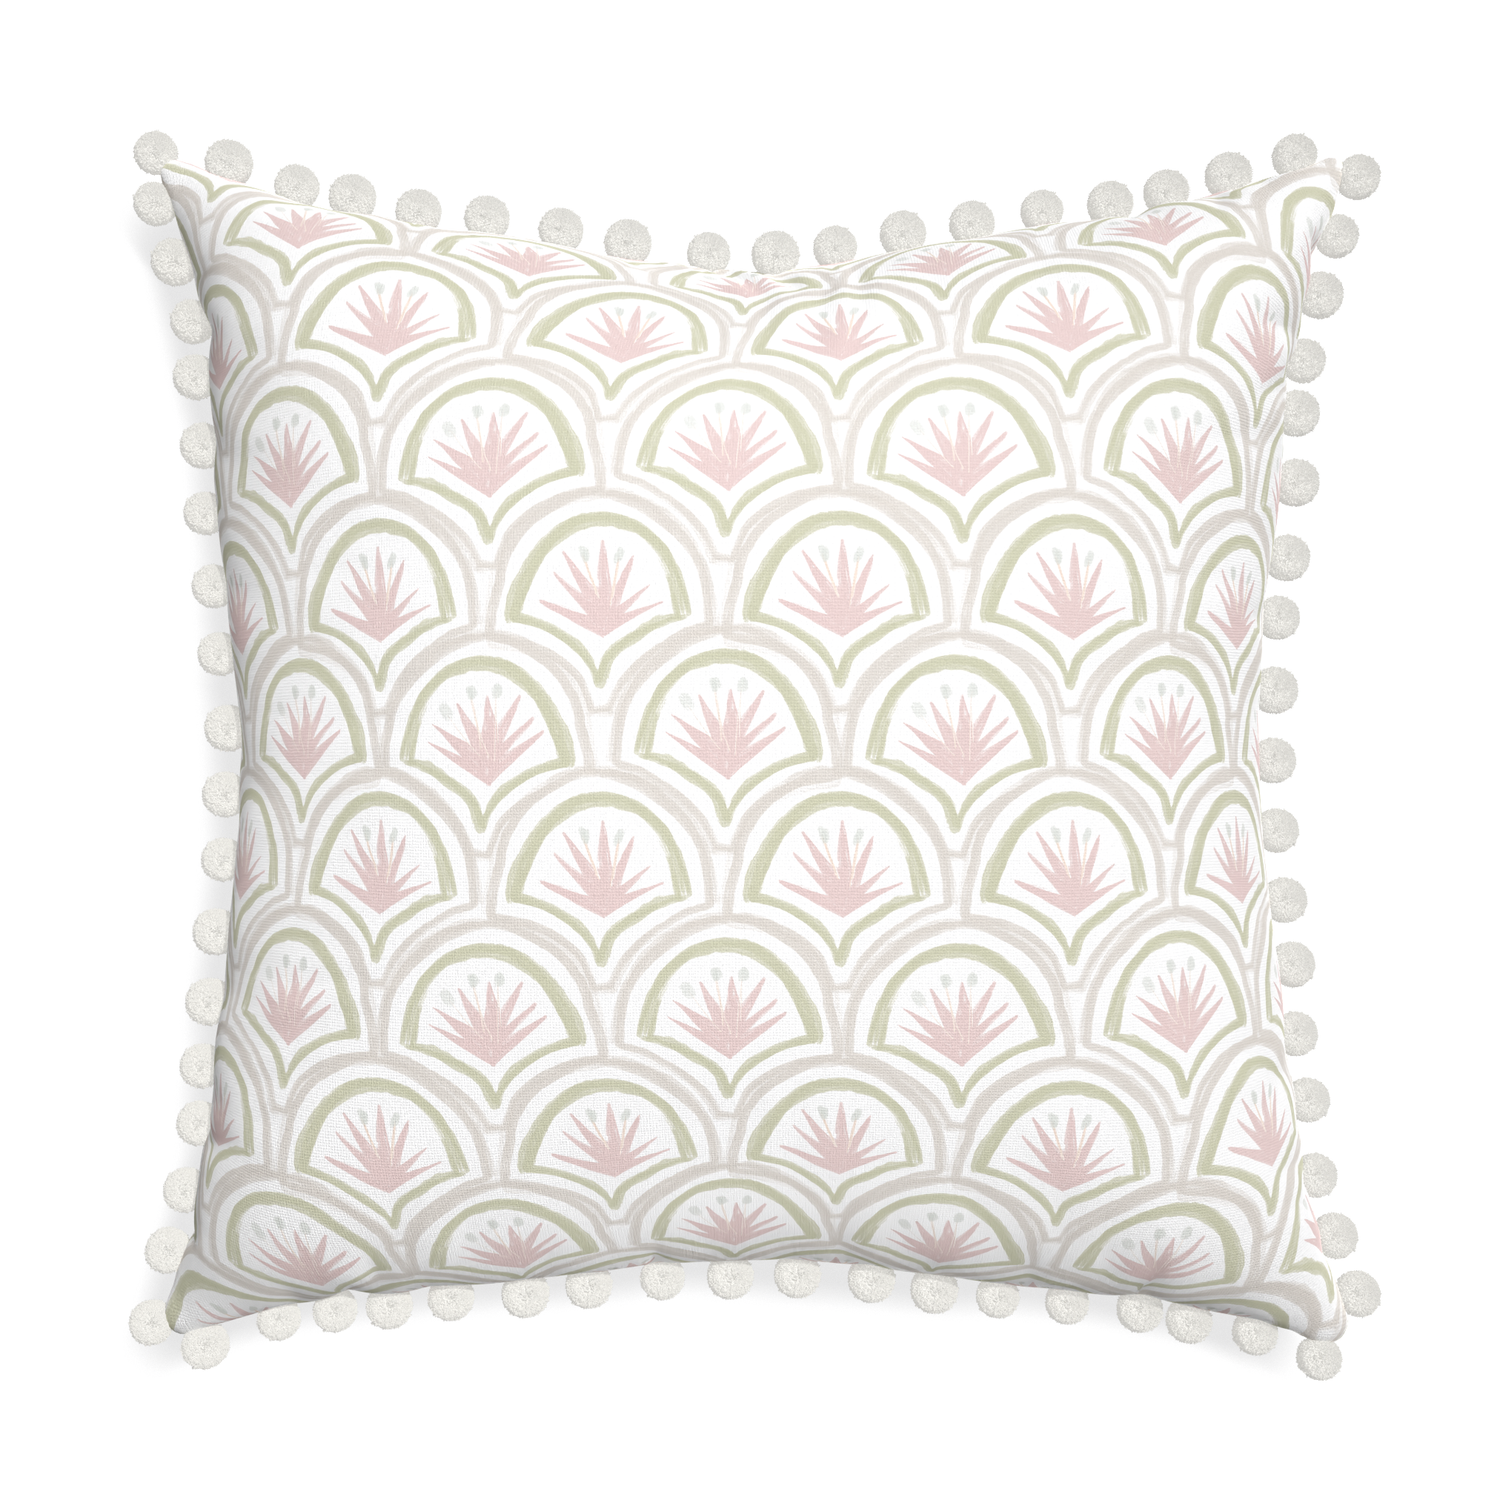 Euro-sham thatcher rose custom pink & green palmpillow with snow pom pom on white background